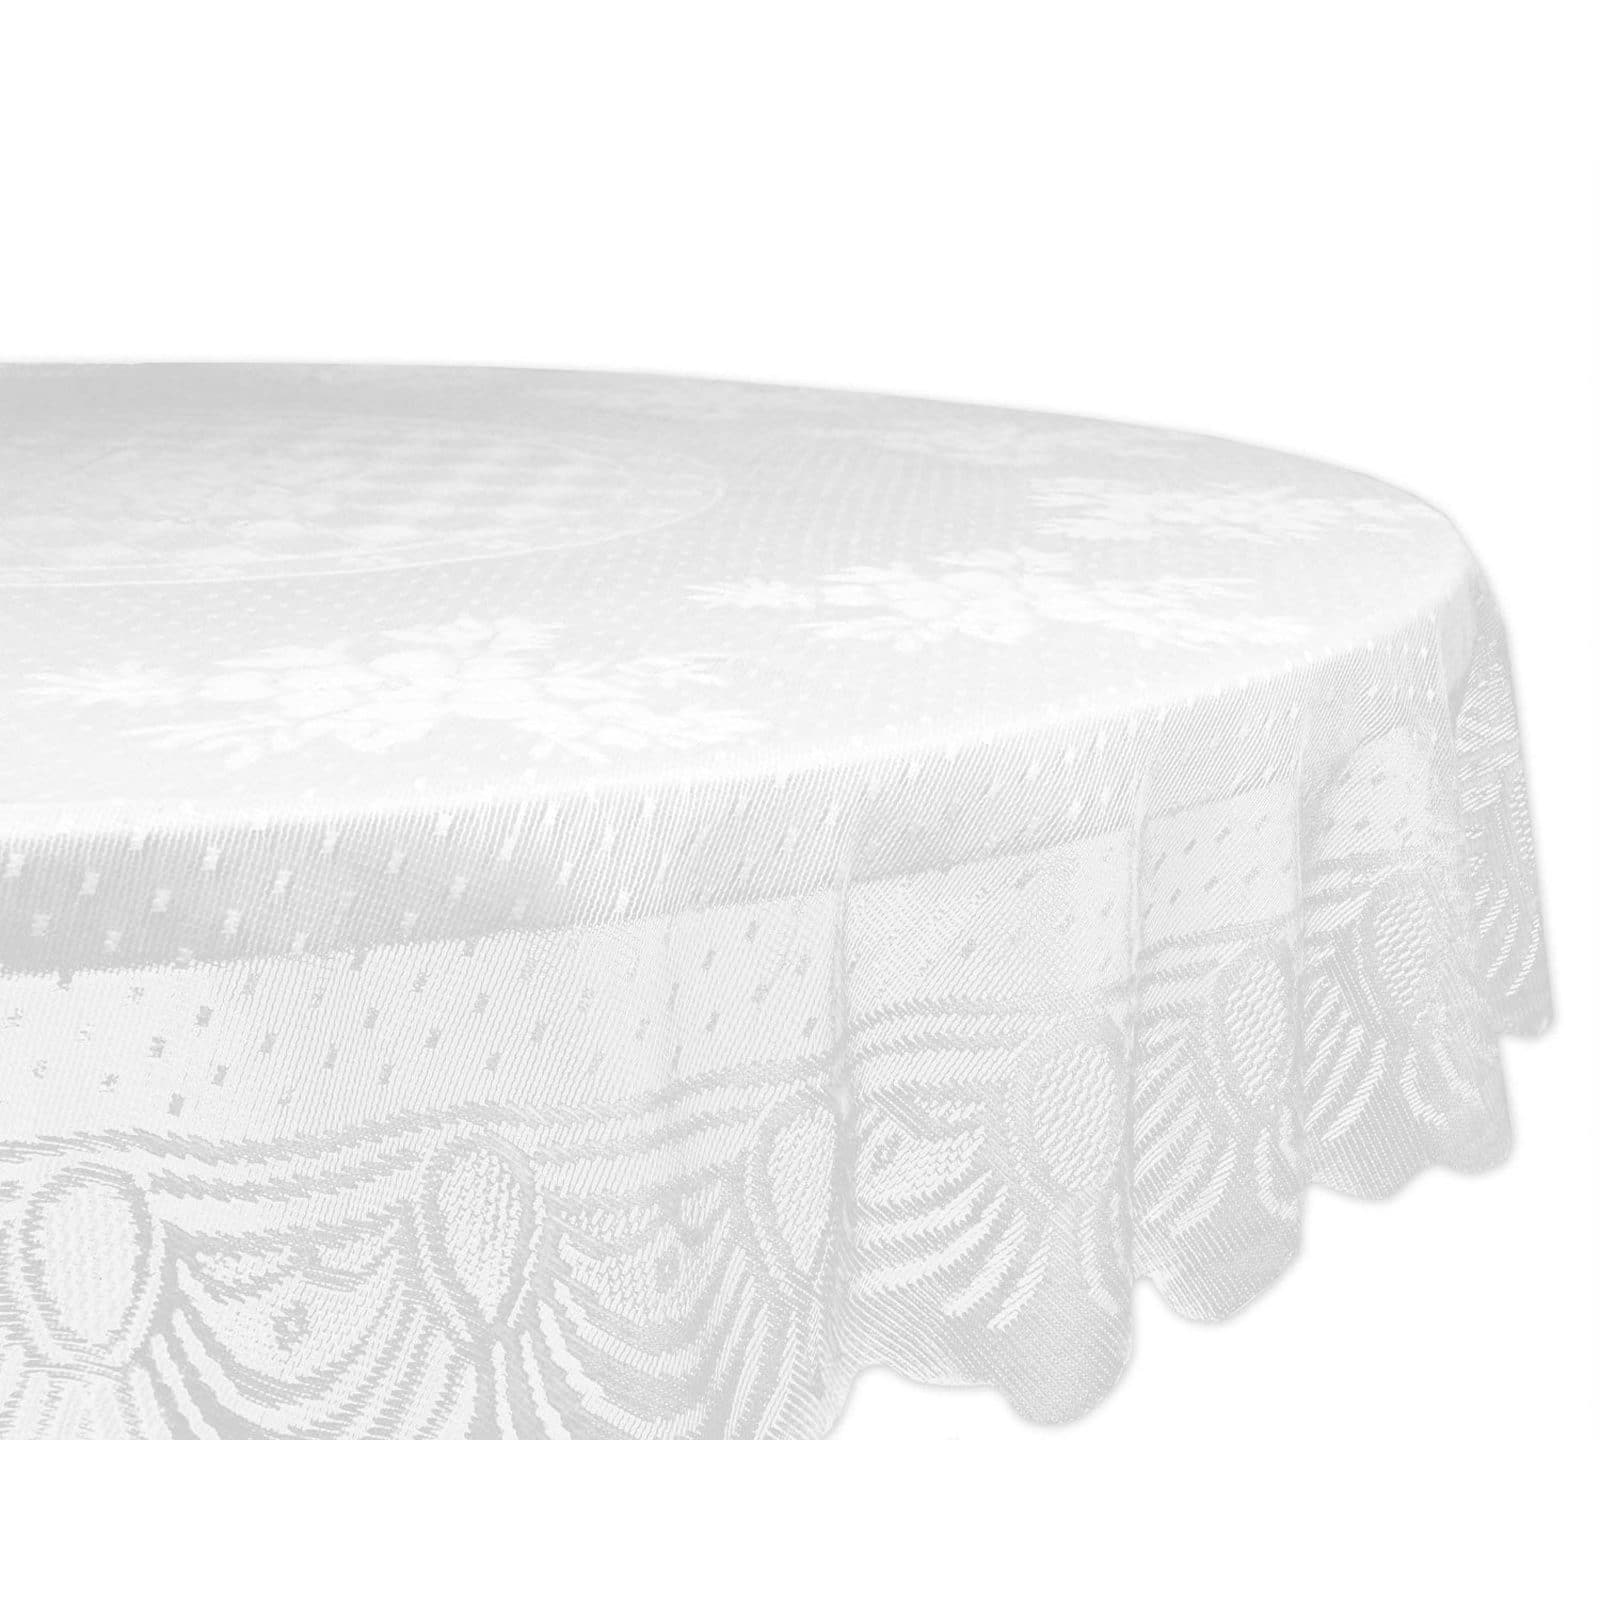 Lace Tablecloth Traditional Woven Floral White and Cream and Colored Vary Sizes 